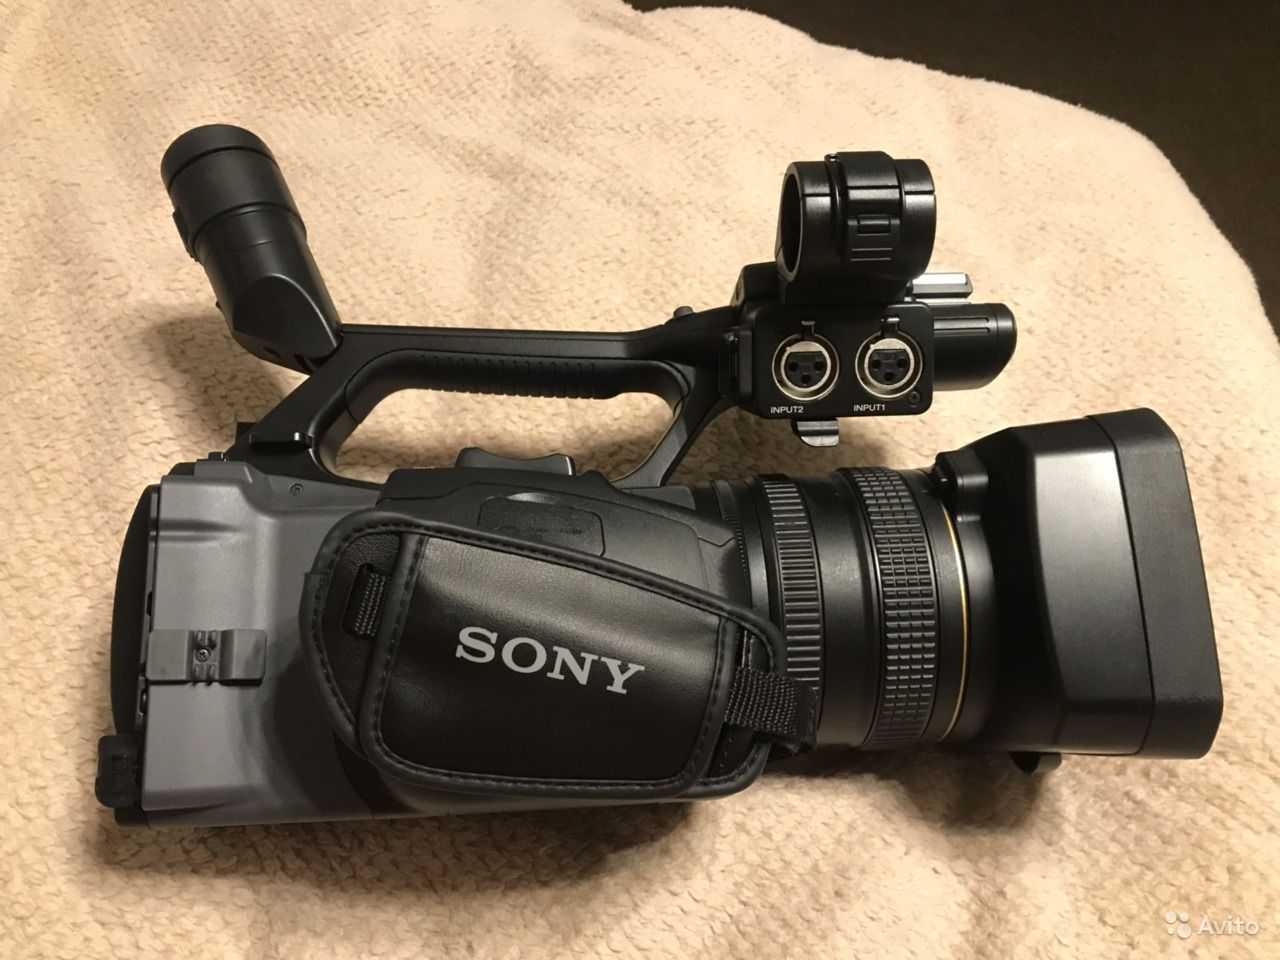 Sony dsr-pd170p